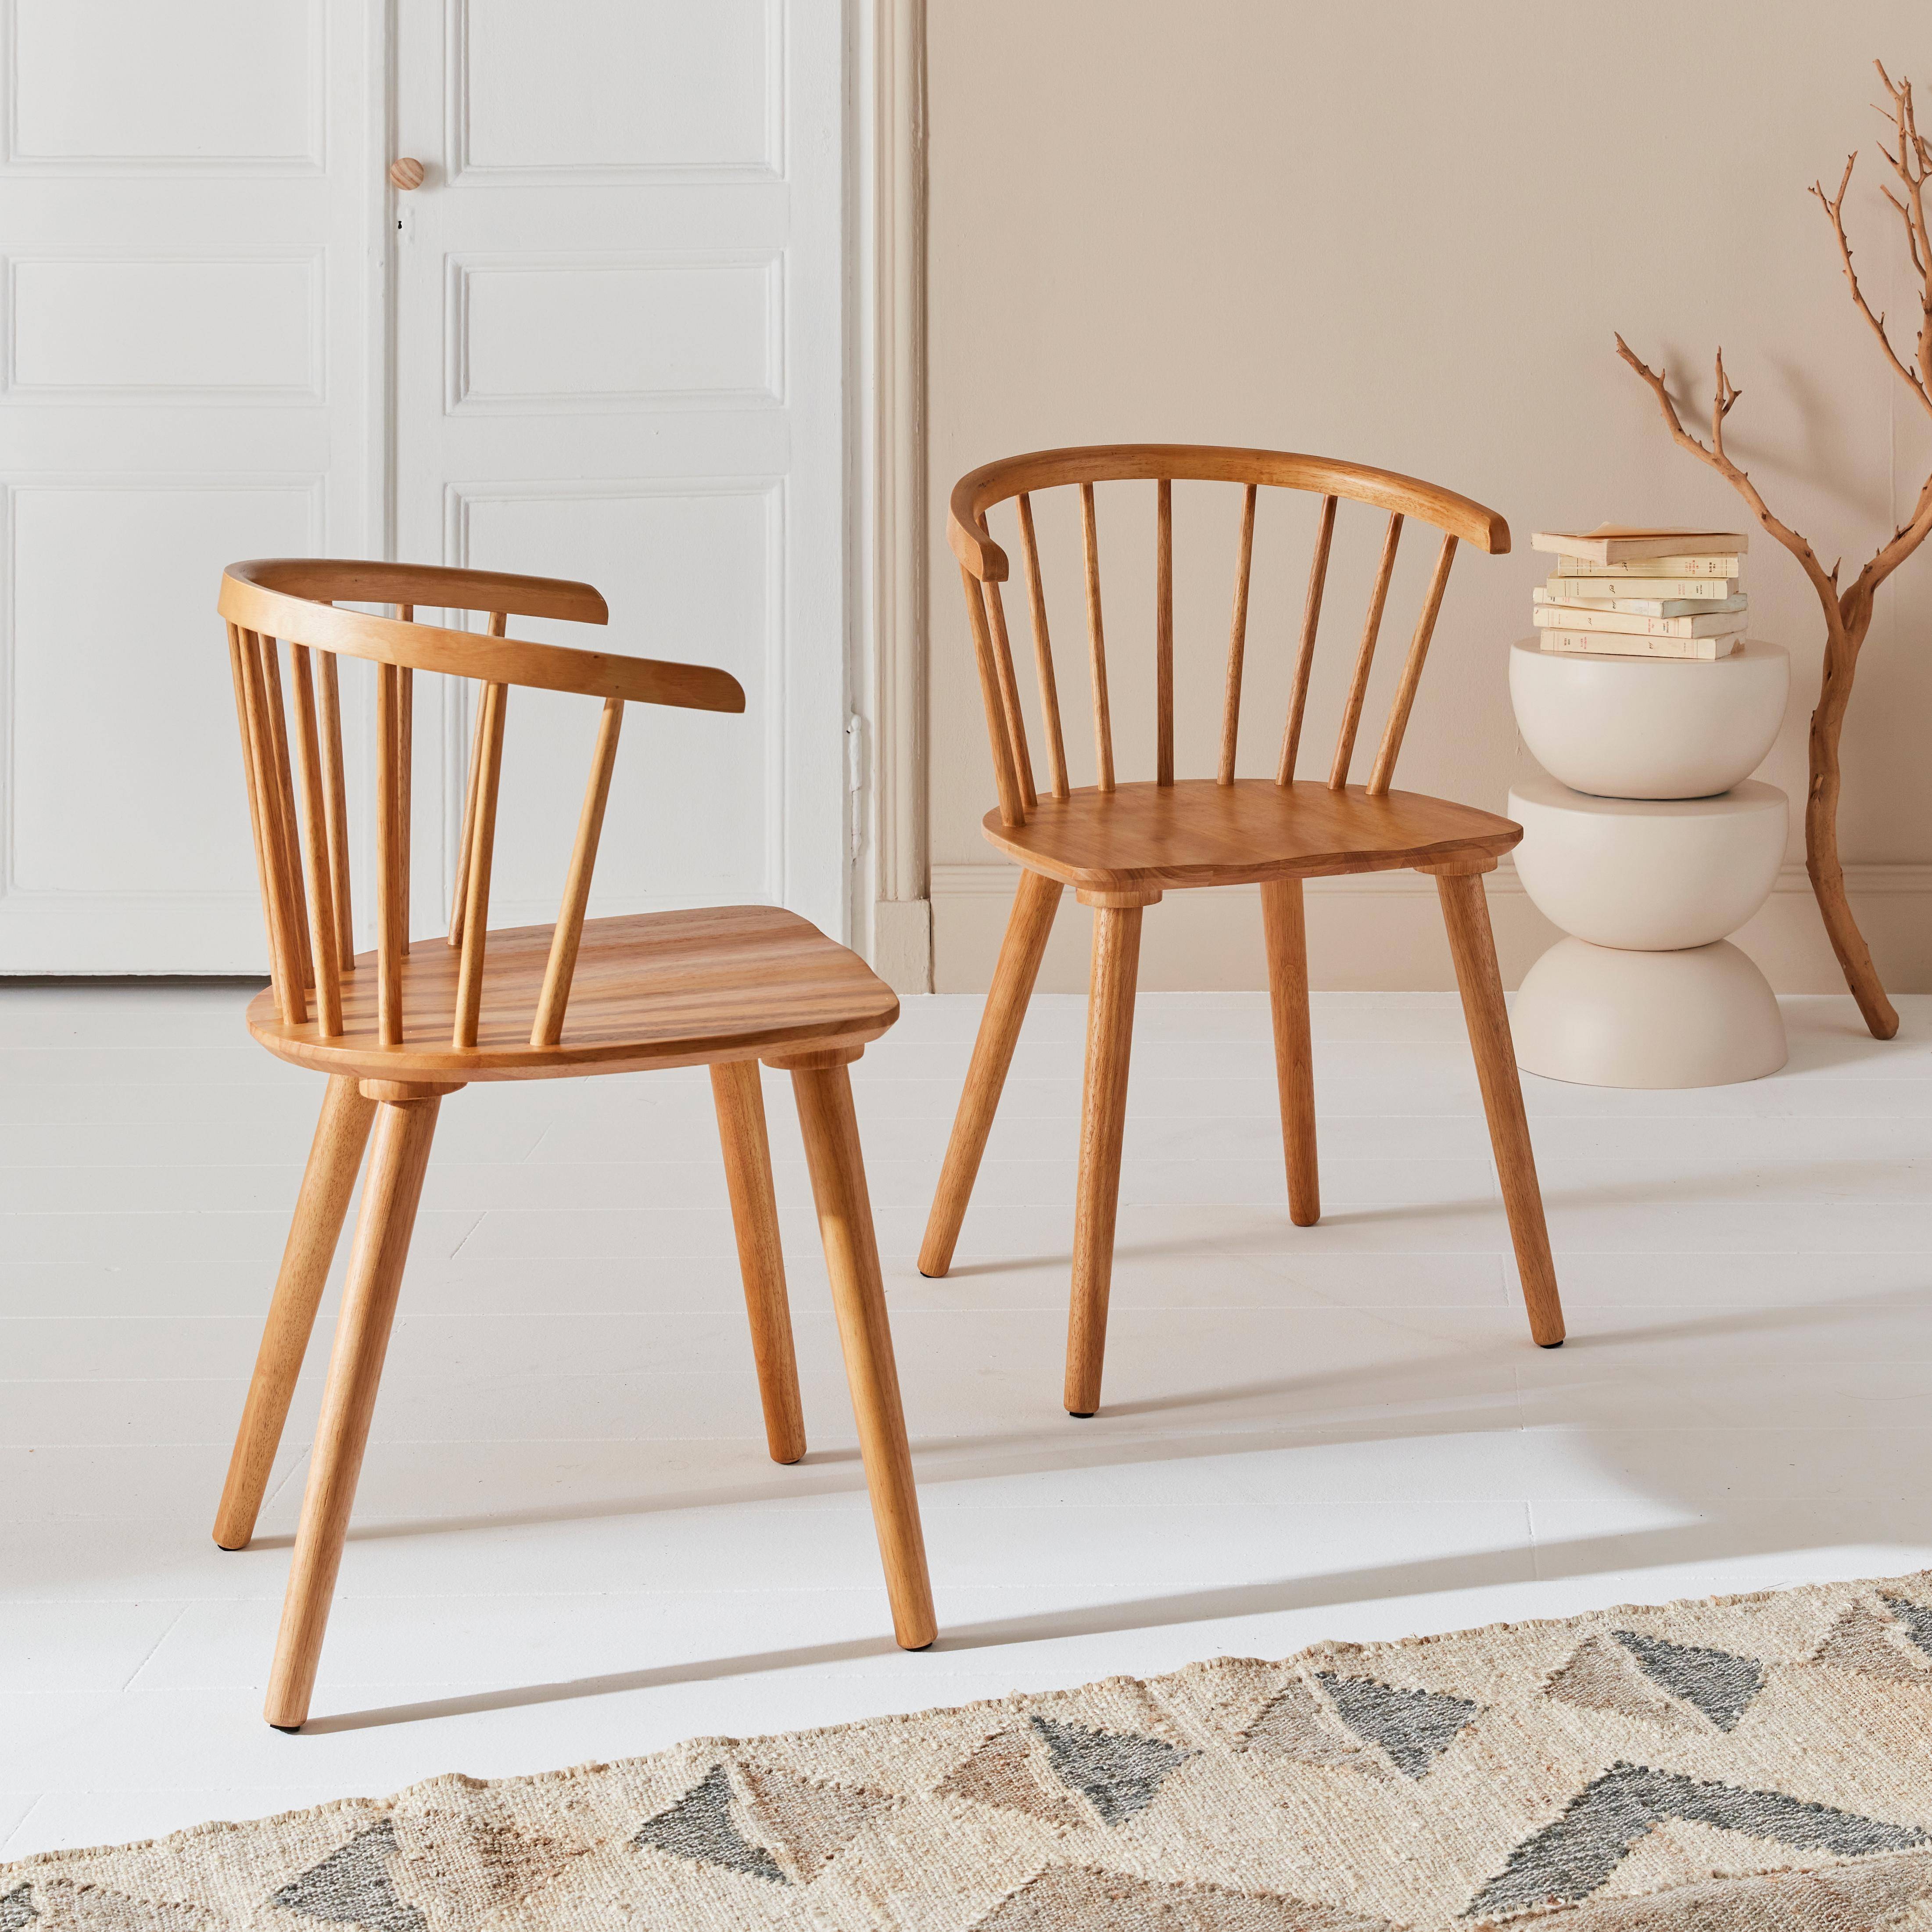 Pair of  Wood and Plywood Spindle Chairs, natural, L53 x W47.5 x H76cm  Photo2